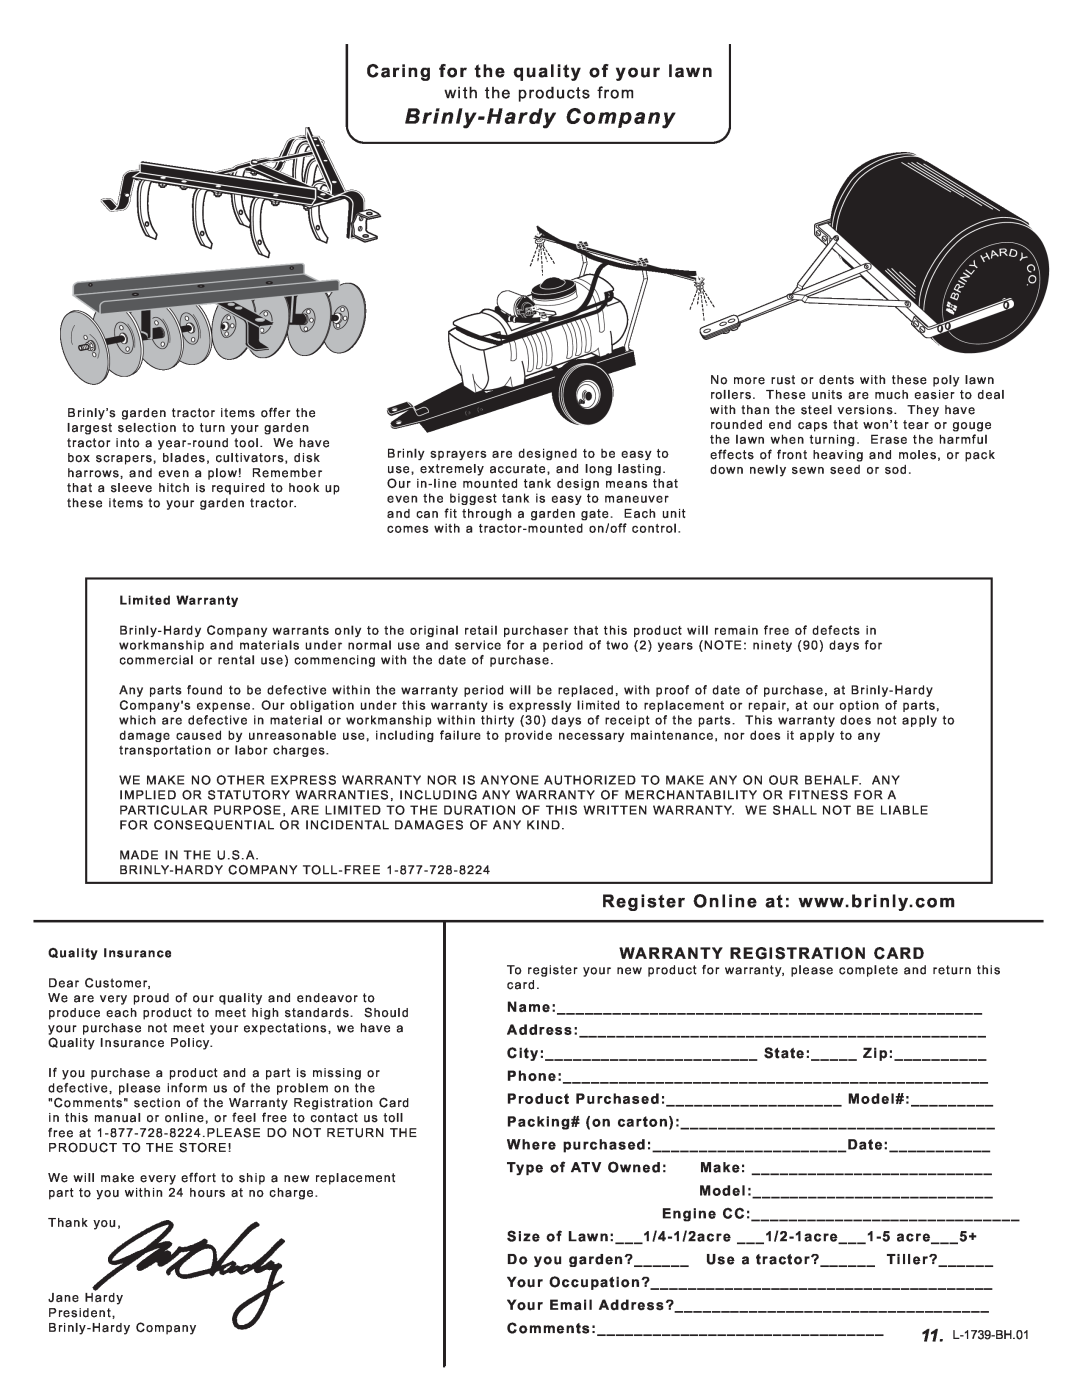 Brinly-Hardy PCT-10LX ATV BH Caring for the quality of your lawn, Brinly-Hardy Company, Warranty Registration Card 